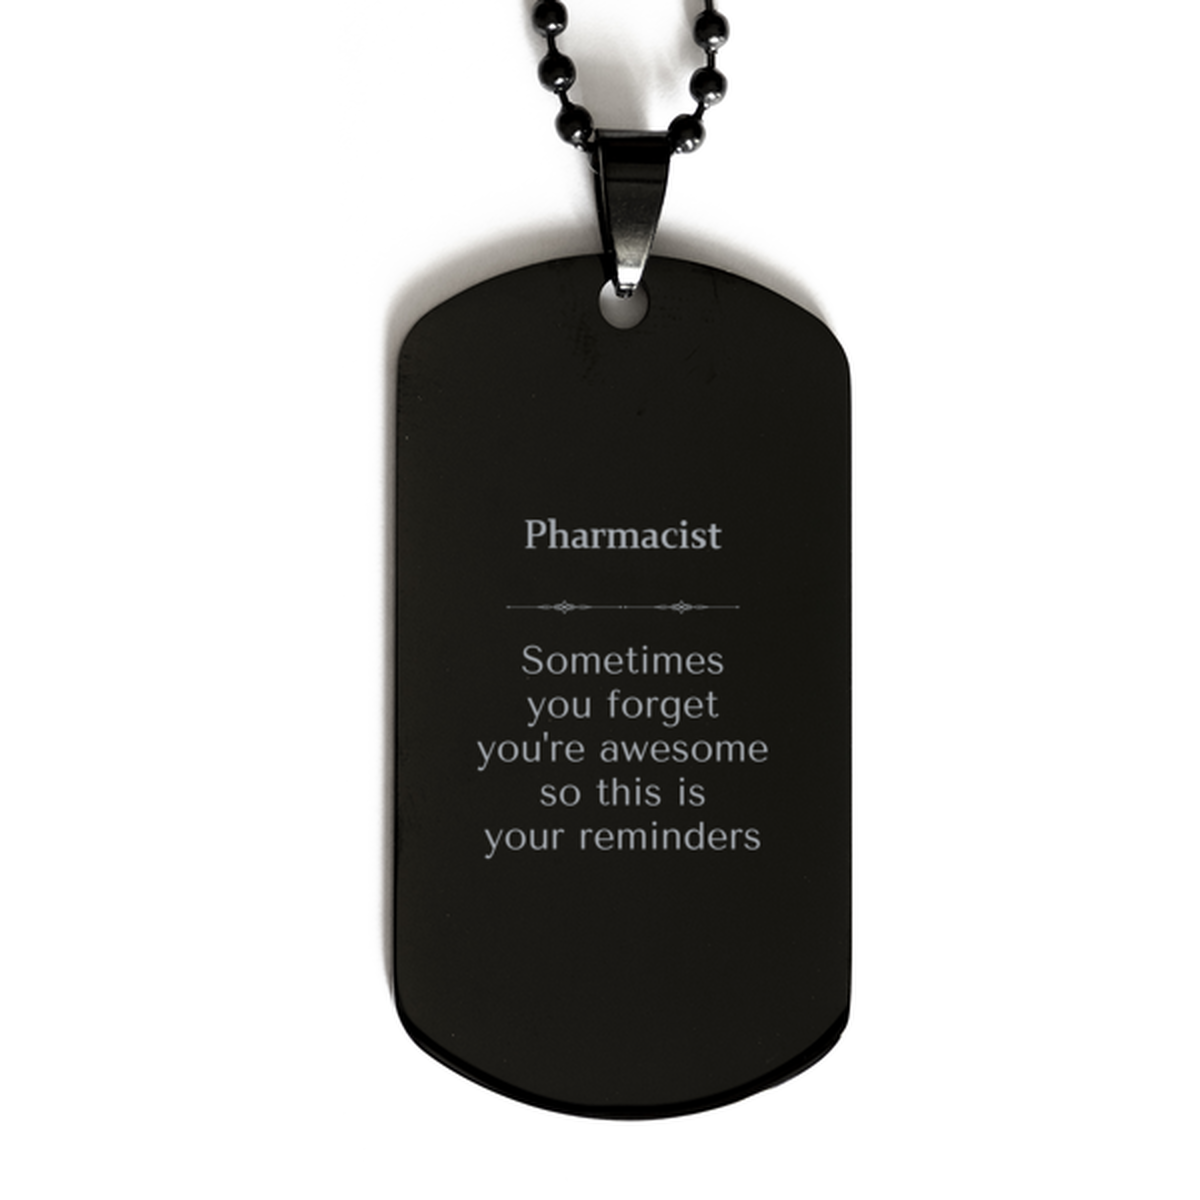 Sentimental Pharmacist Black Dog Tag, Pharmacist Sometimes you forget you're awesome so this is your reminders, Graduation Christmas Birthday Gifts for Pharmacist, Men, Women, Coworkers